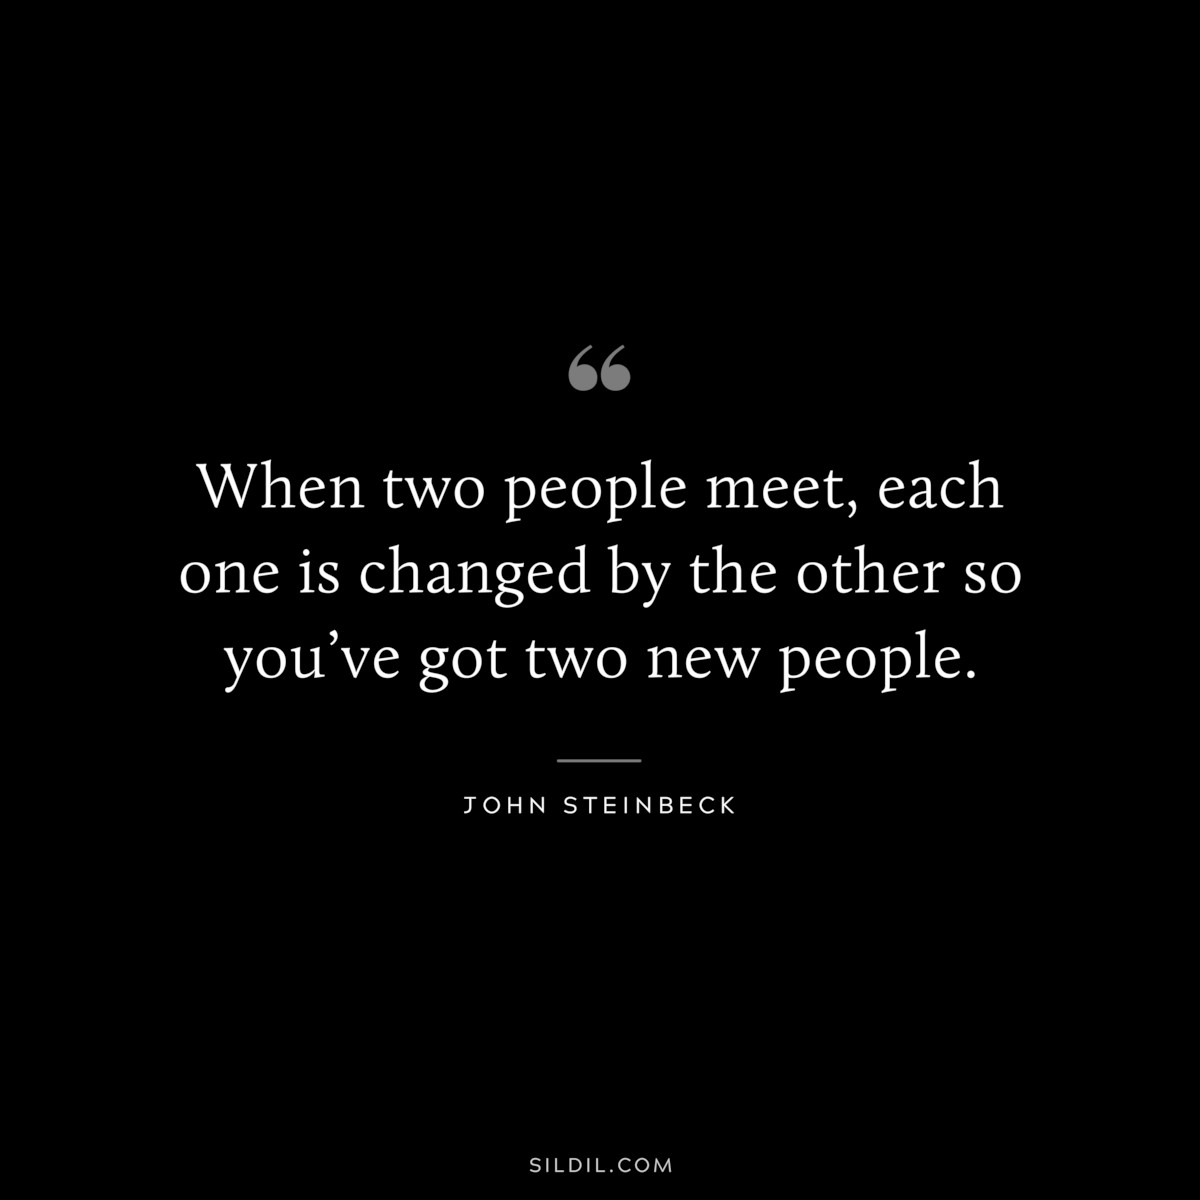 When two people meet, each one is changed by the other so you’ve got two new people.― John Steinbeck